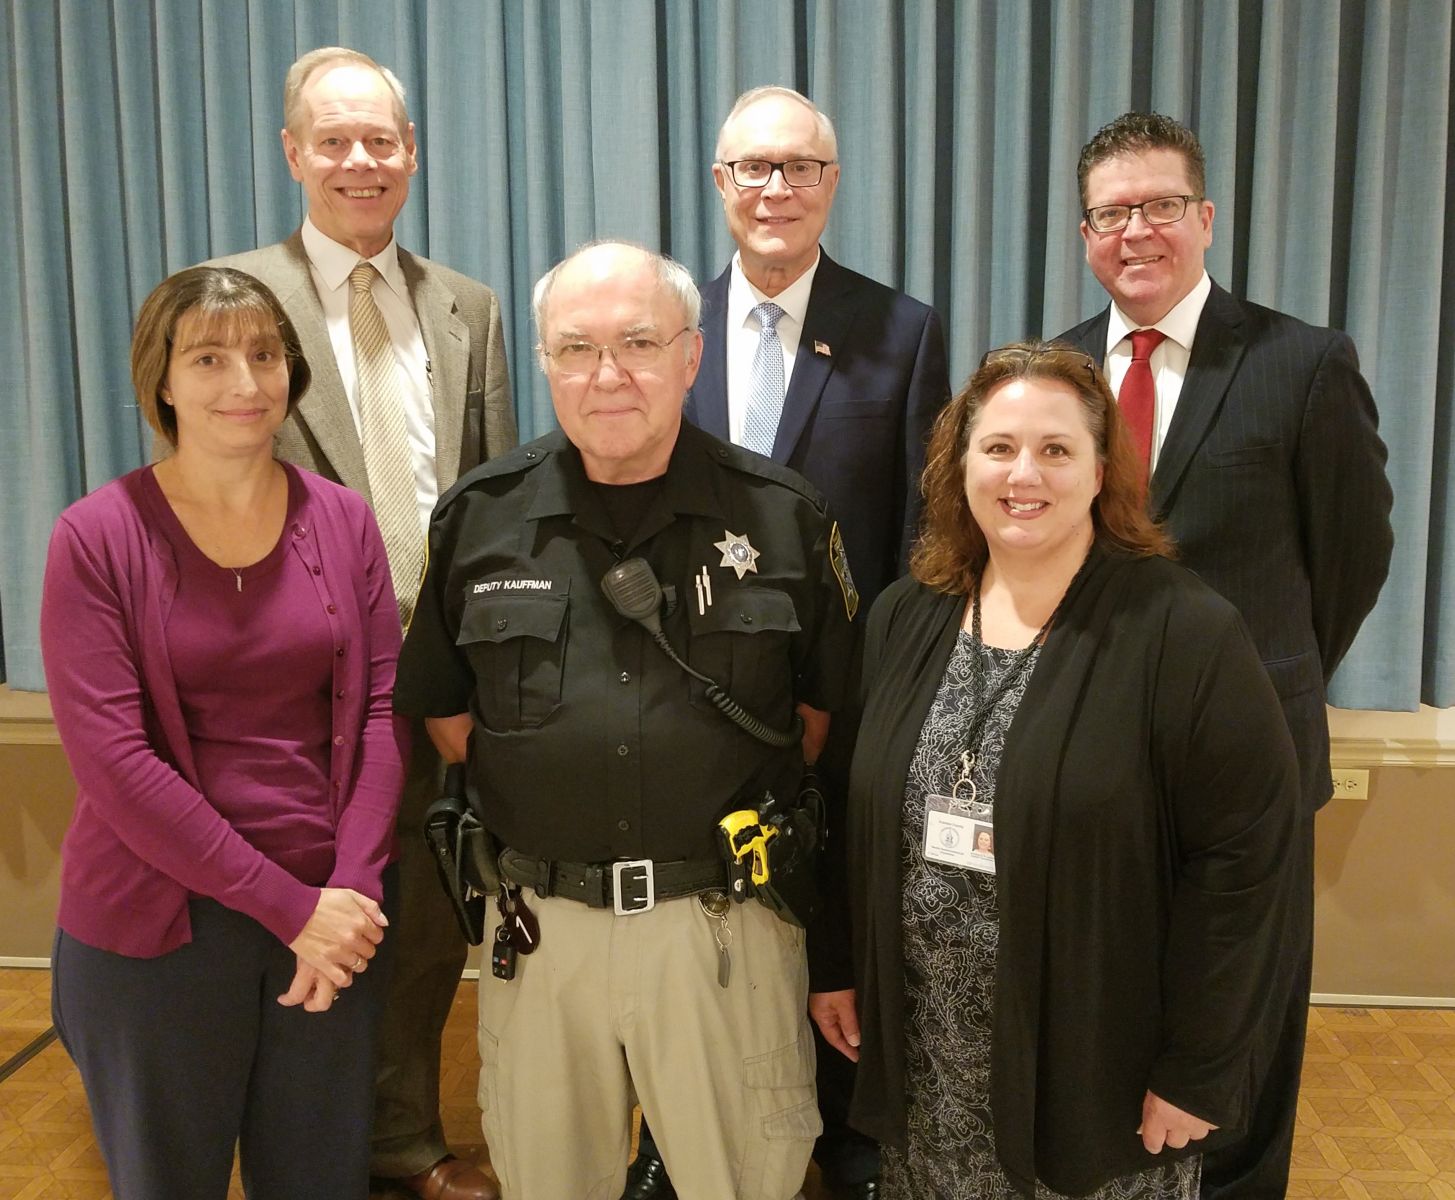 15 Years of Service Pictured above (left to right): top row- Commissioner Bob Ziobrowski, Commissioner Bob Thomas, Commissioner Chairman Dave Keller; bottom row- Ellen Eckert, William Kauffman, Kimberly Lucas Missing from photo:  David Eckert